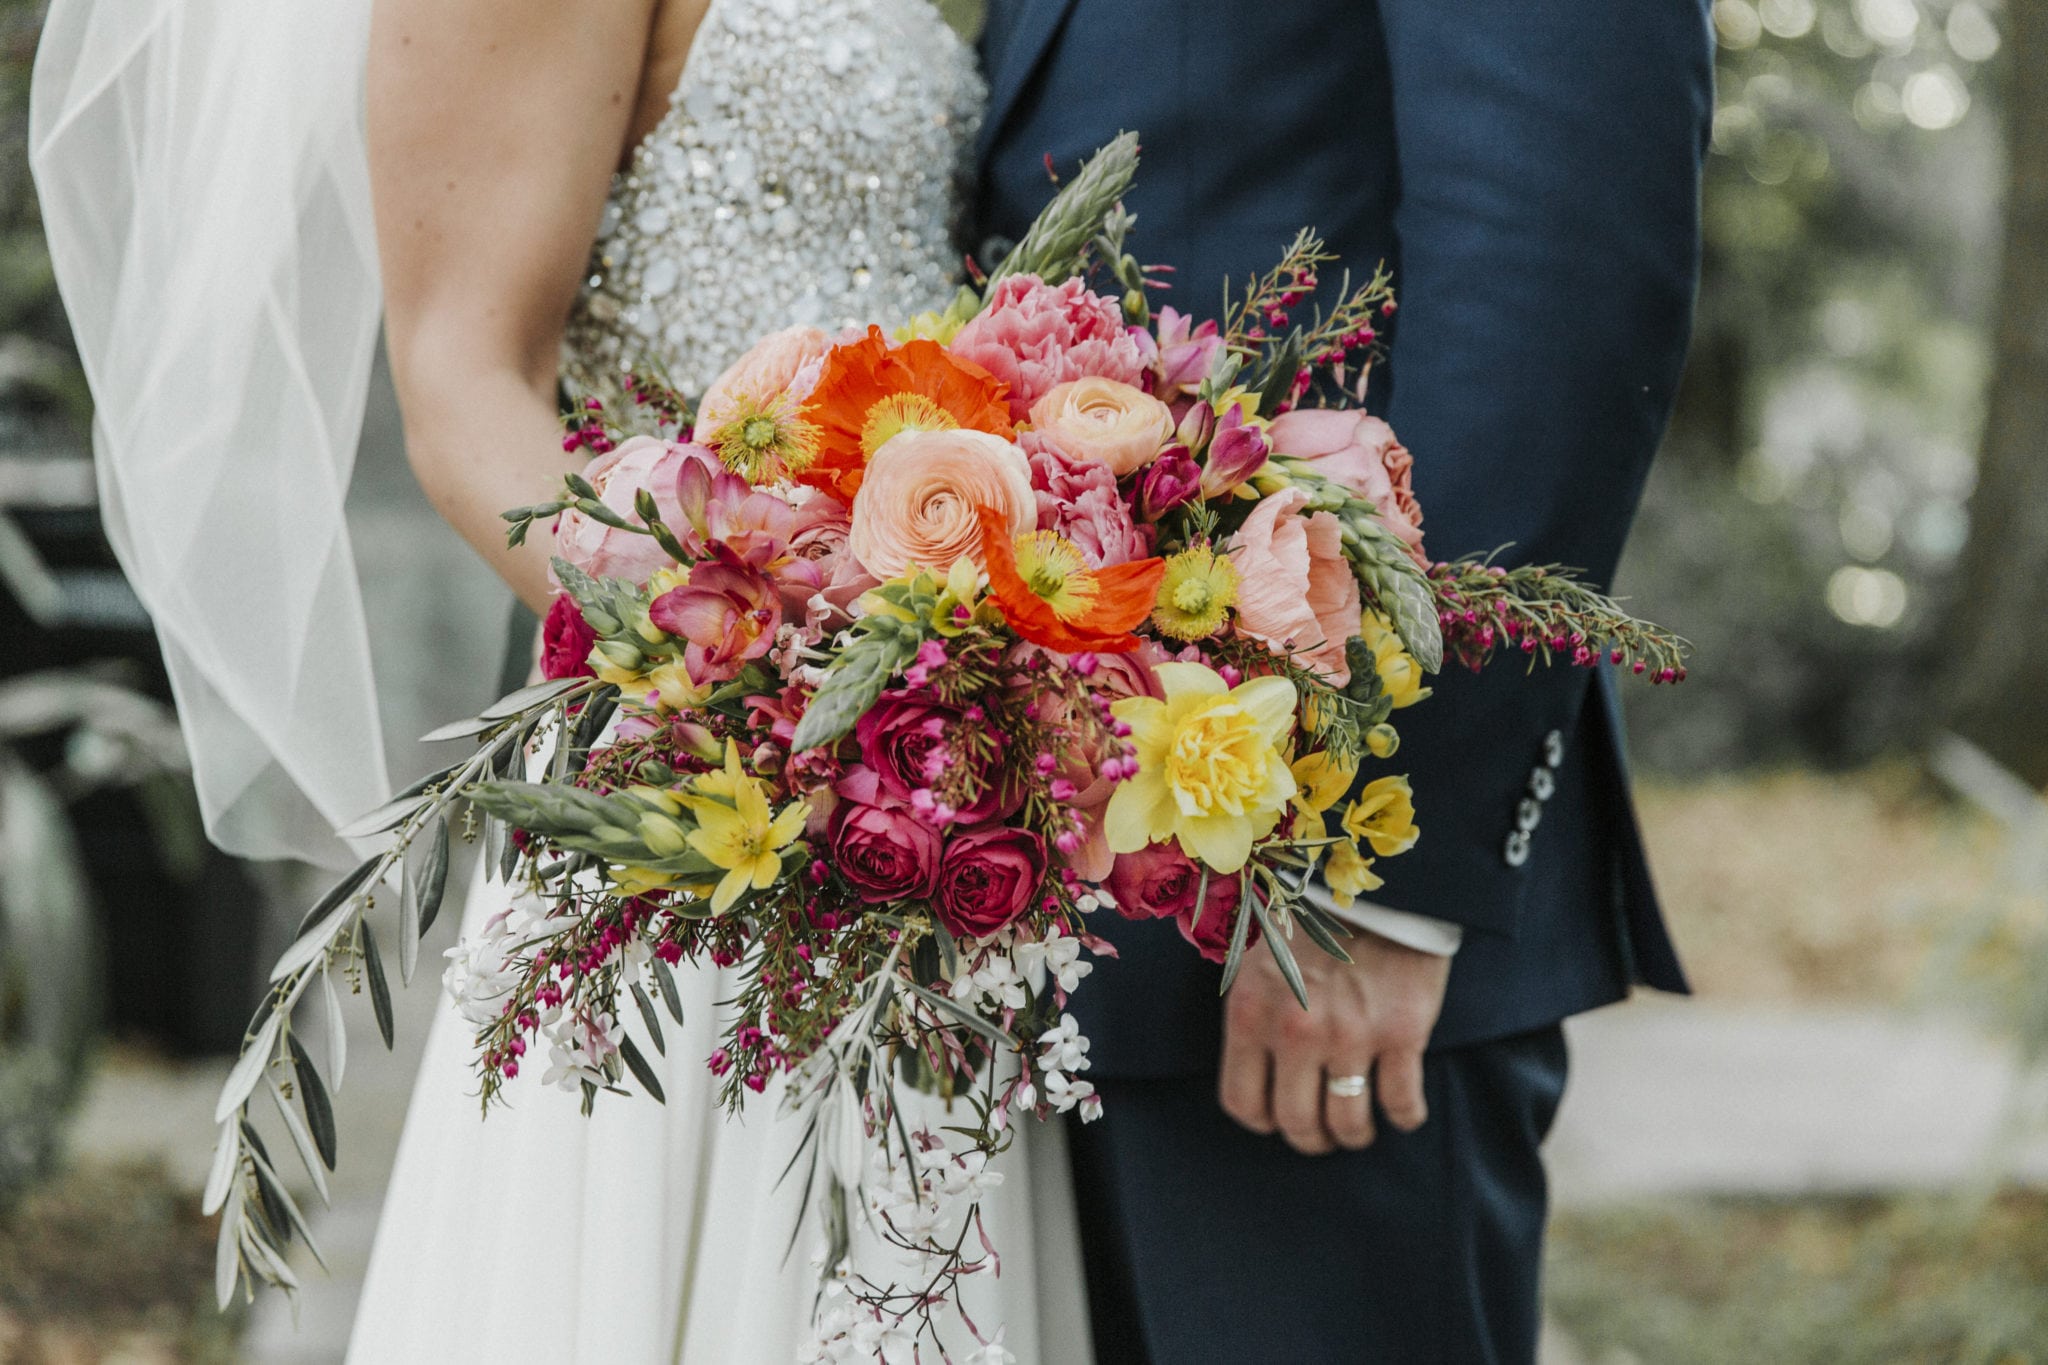 new orleans spring wedding floral arrangements kim starr wise bridal bouquet with a slight cascade in shades of fuchsia orange, peach, blush, and hints of yellow with greenery